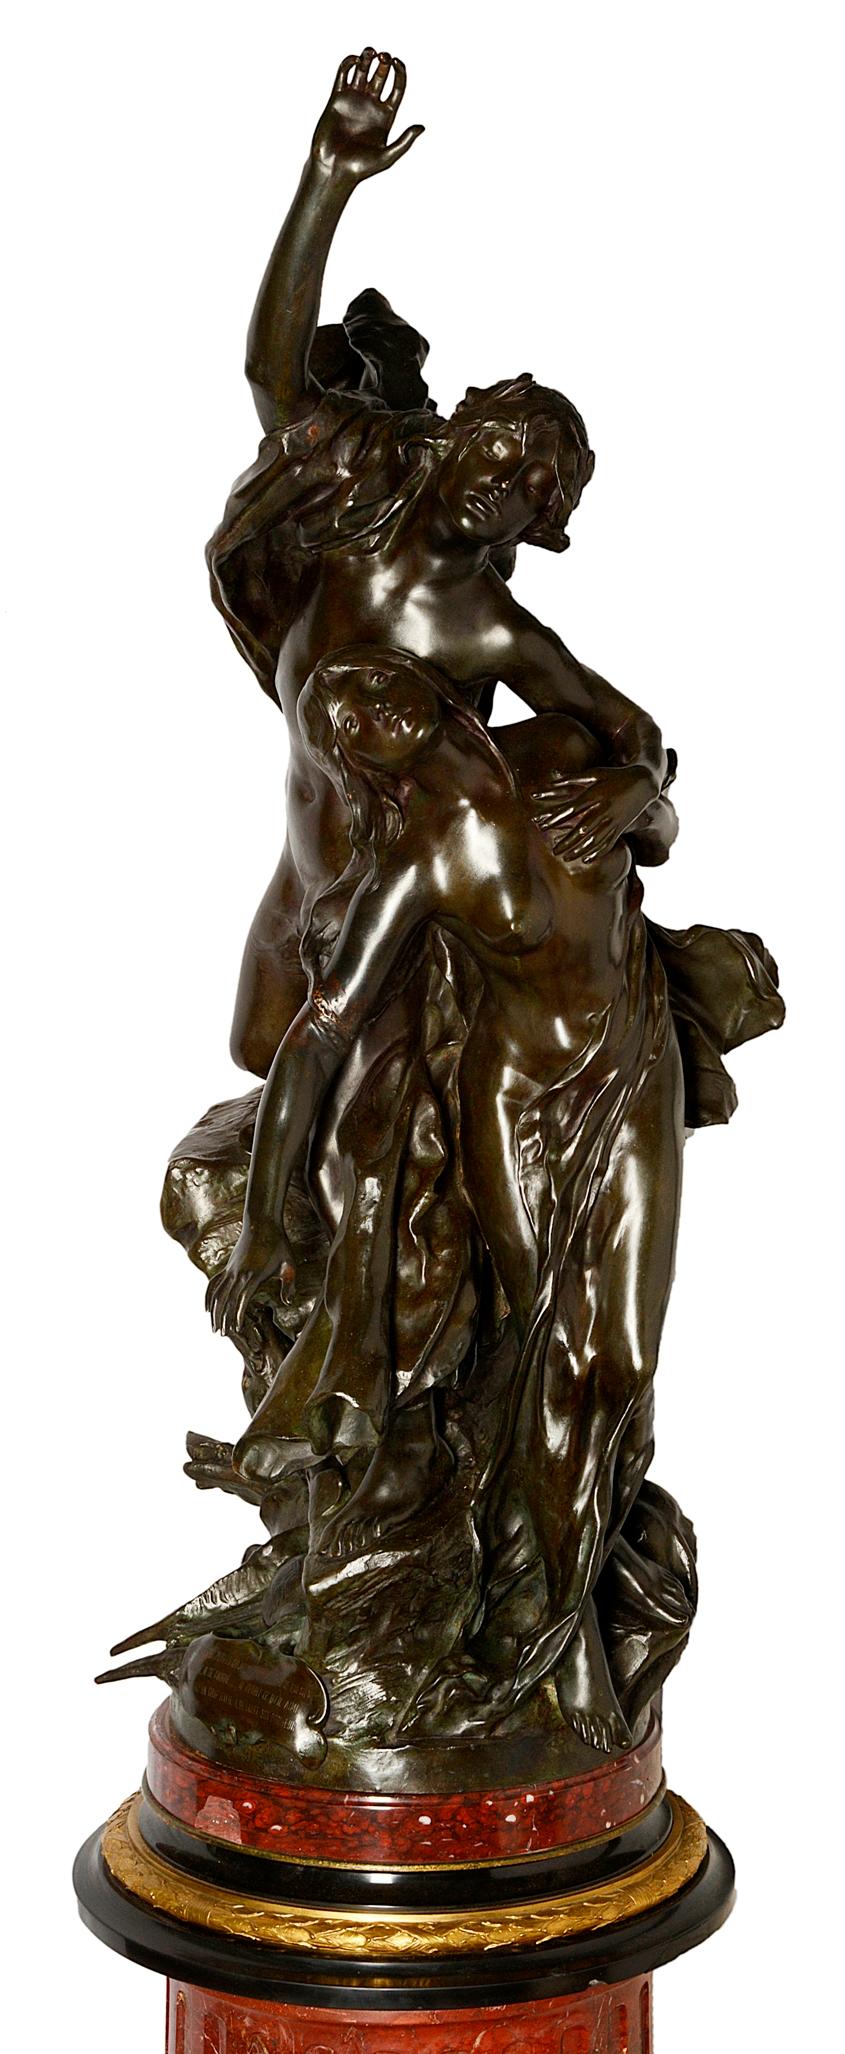 A very impressive classical 19th century bronze statue of god like semi-nude figures reaching for the sky, with a hound at their feet.
Mounted on an impressive rouge marble pedestal with ormolu mounts.
A plaque reading;
PRESQUE AUX PORTES DU JOUR